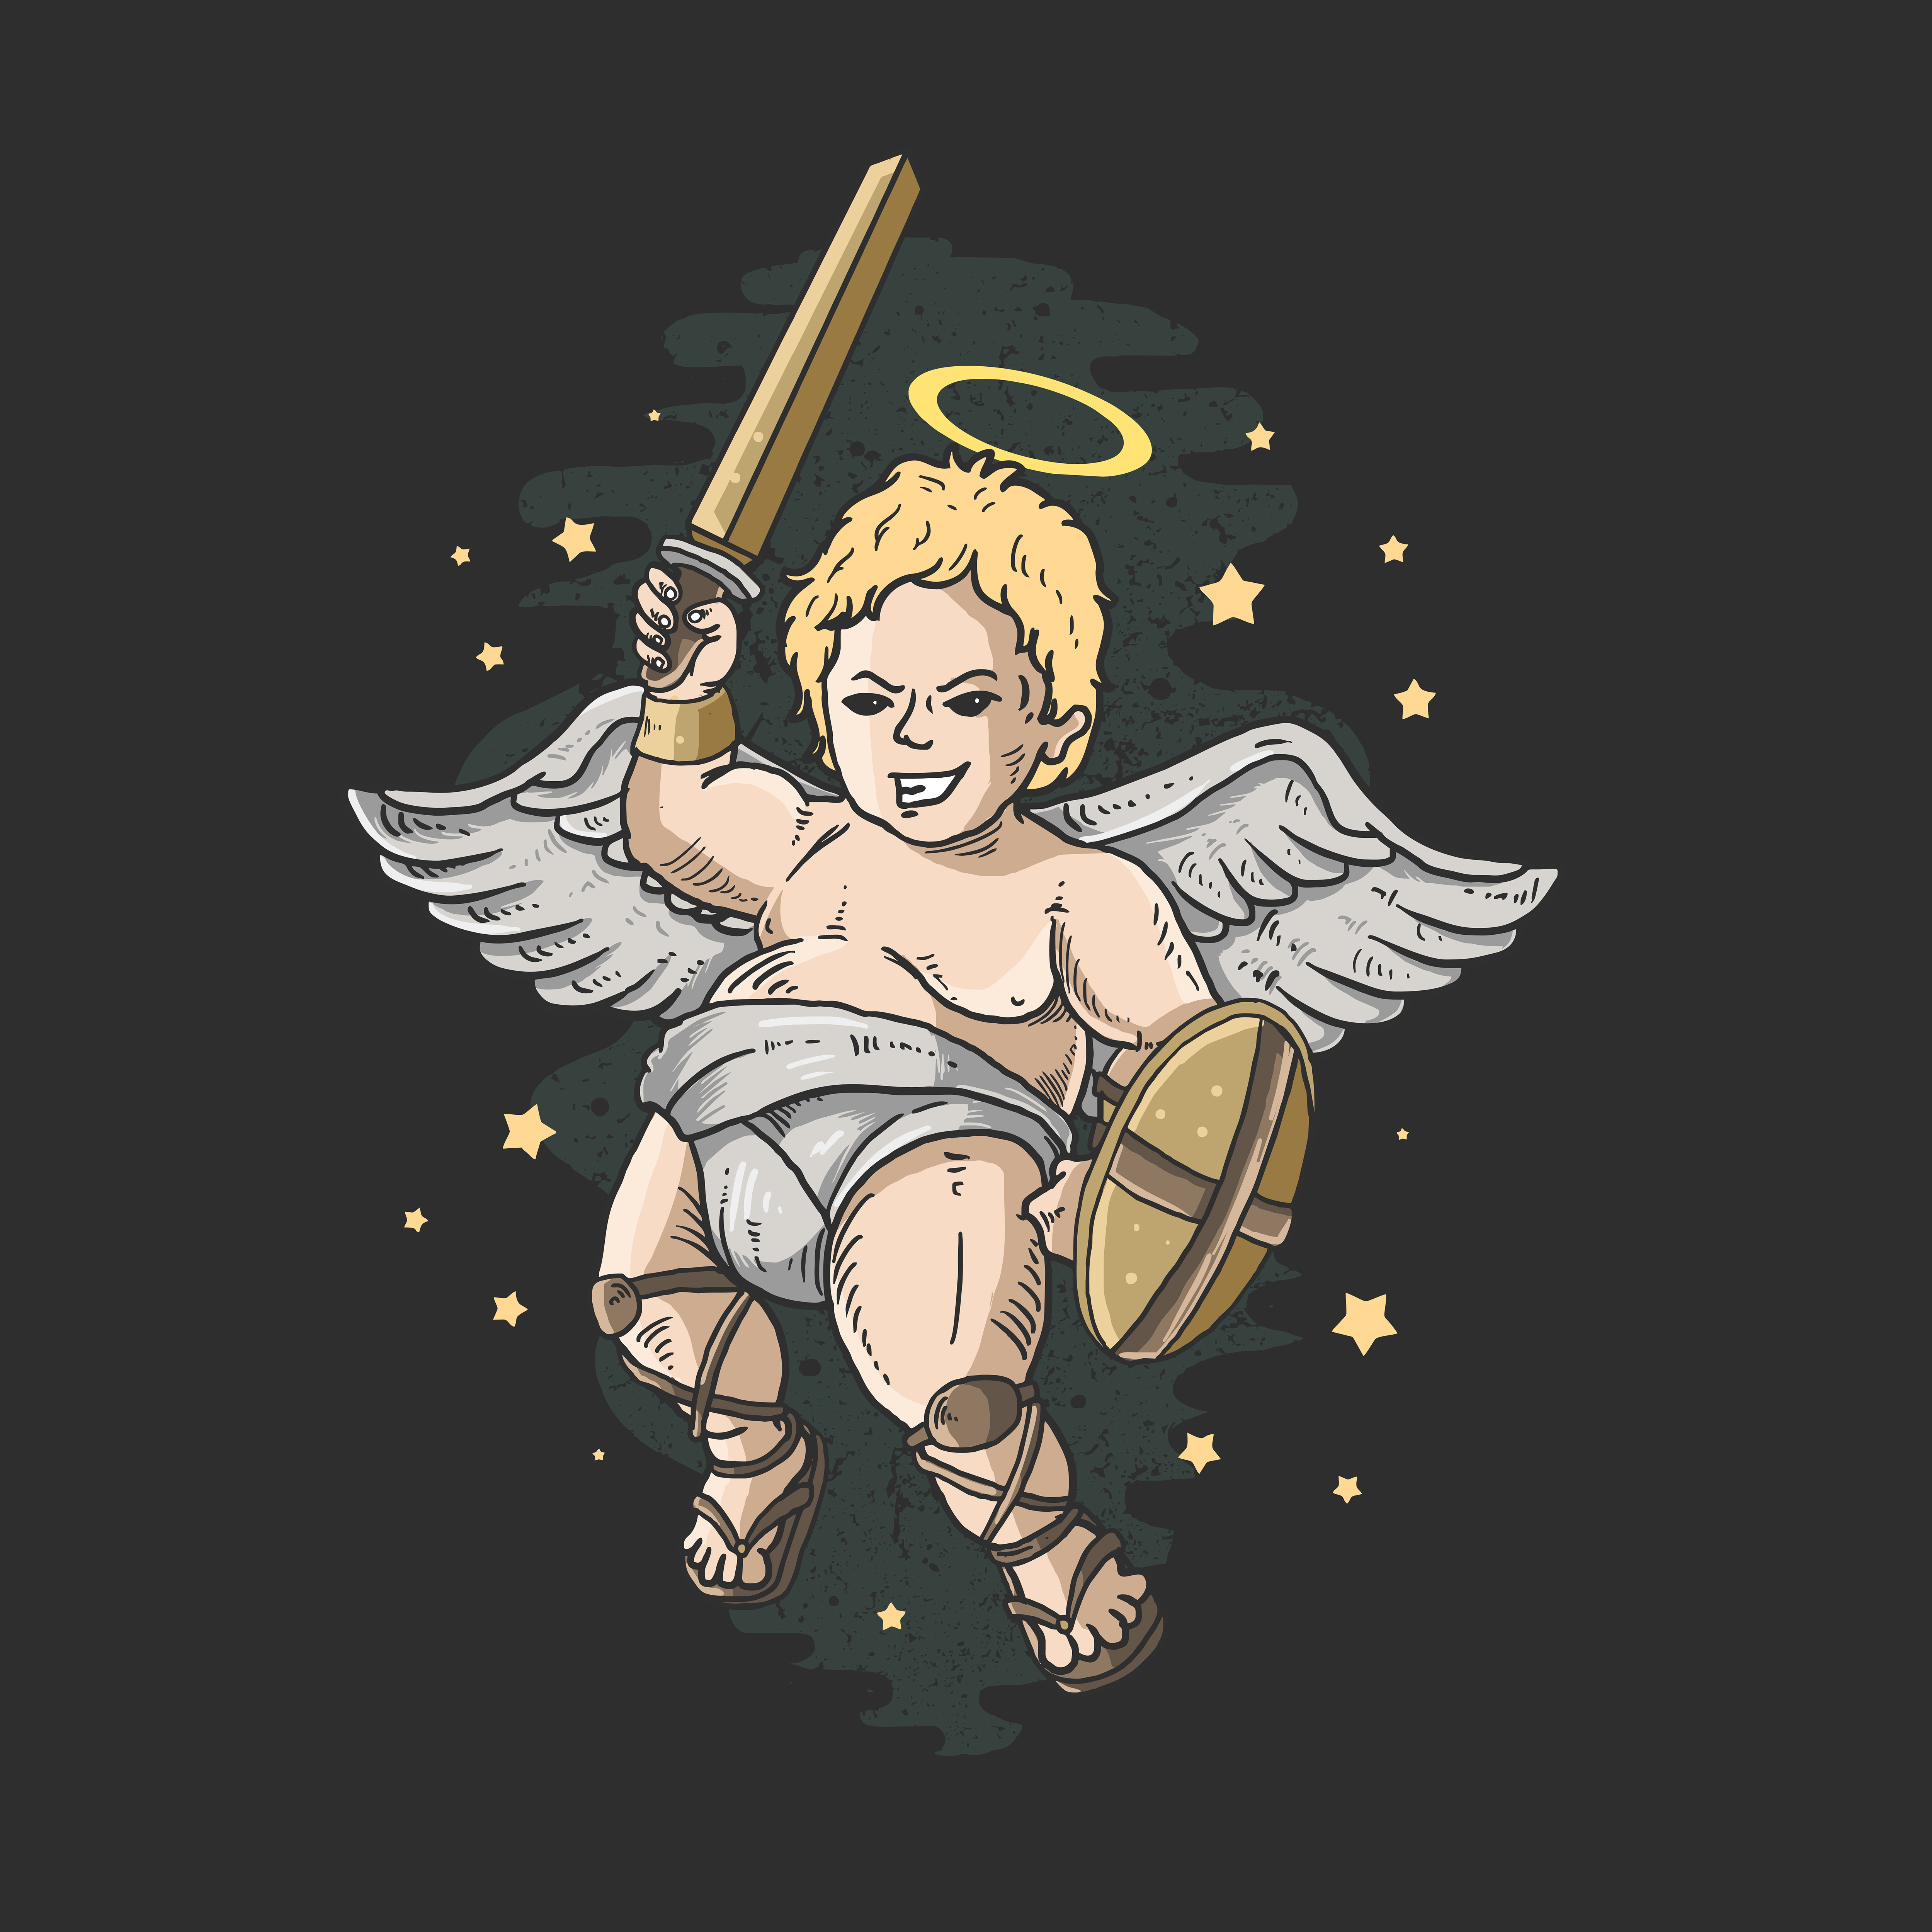 Cute Cupid Angel With Sword And Shield Download Free Vectors Clipart Graphics Vector Art